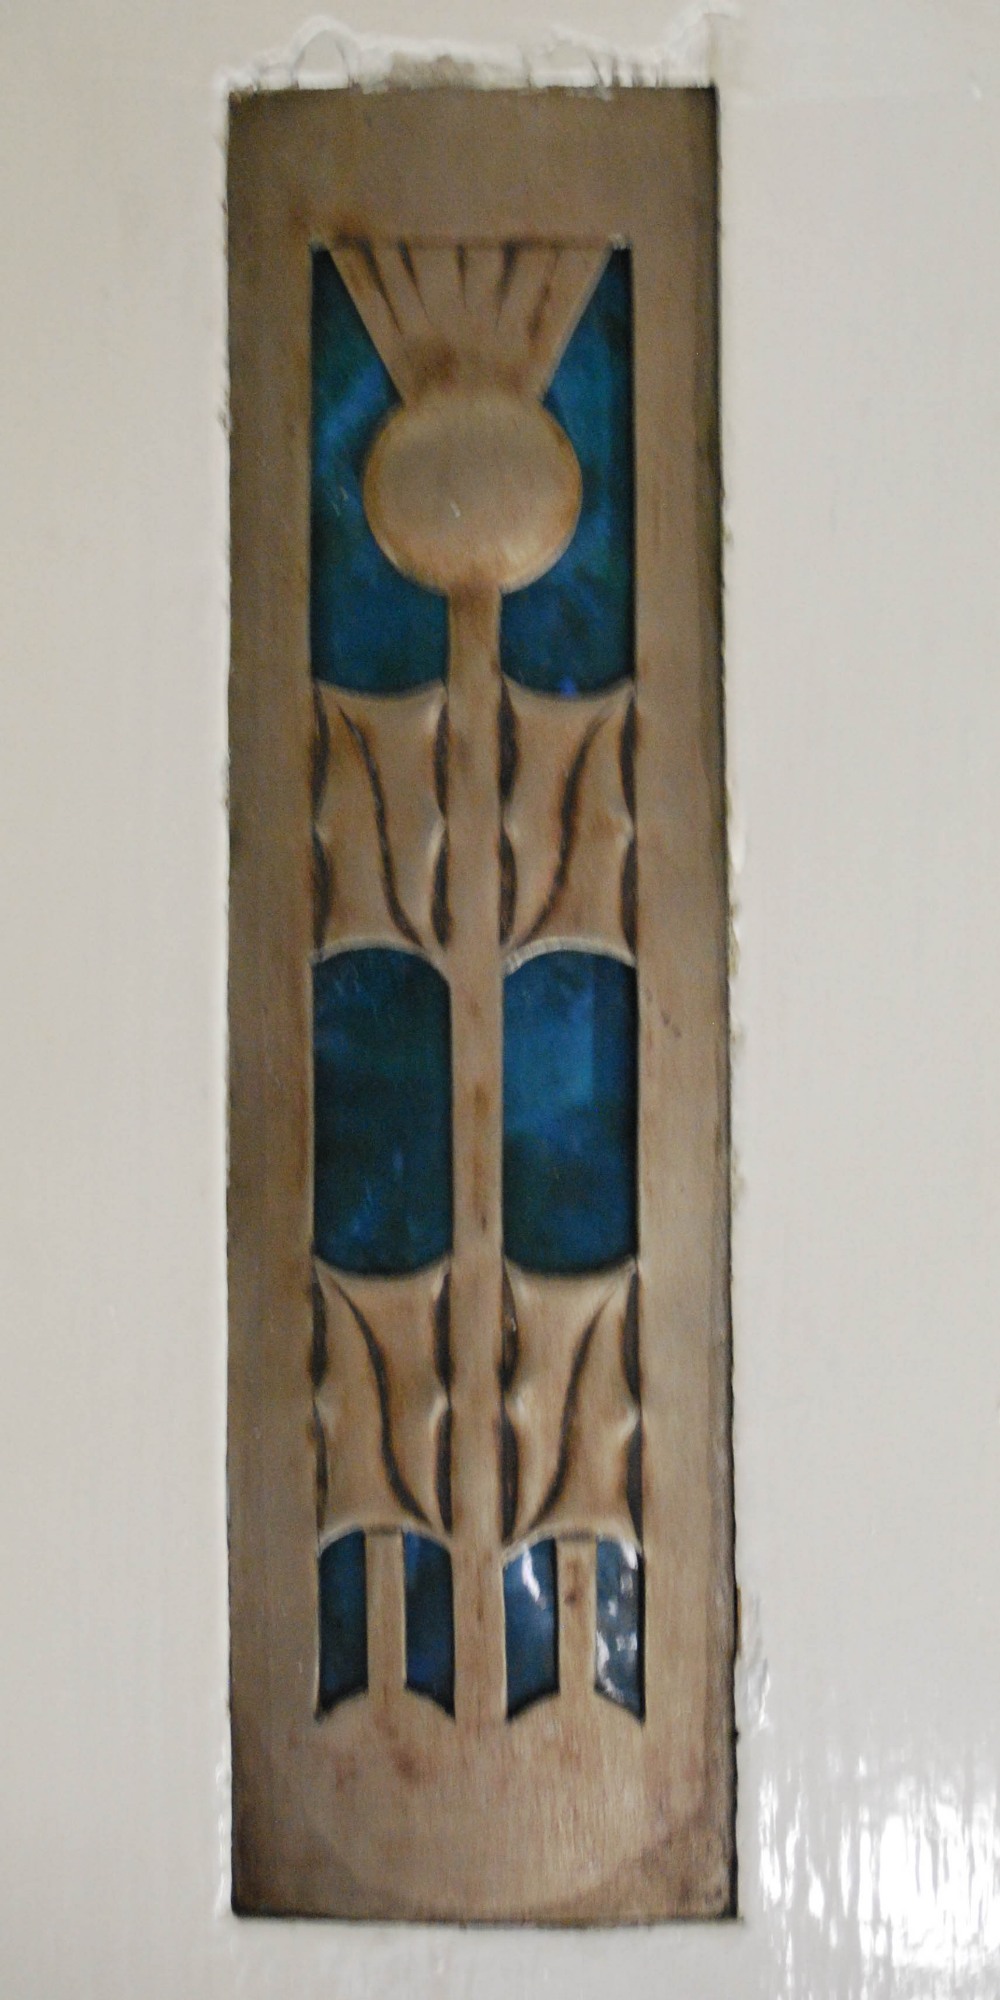 A Scottish Glasgow School Arts & Crafts painted wood, leaded glass and metal mounted fire surround - Image 2 of 12